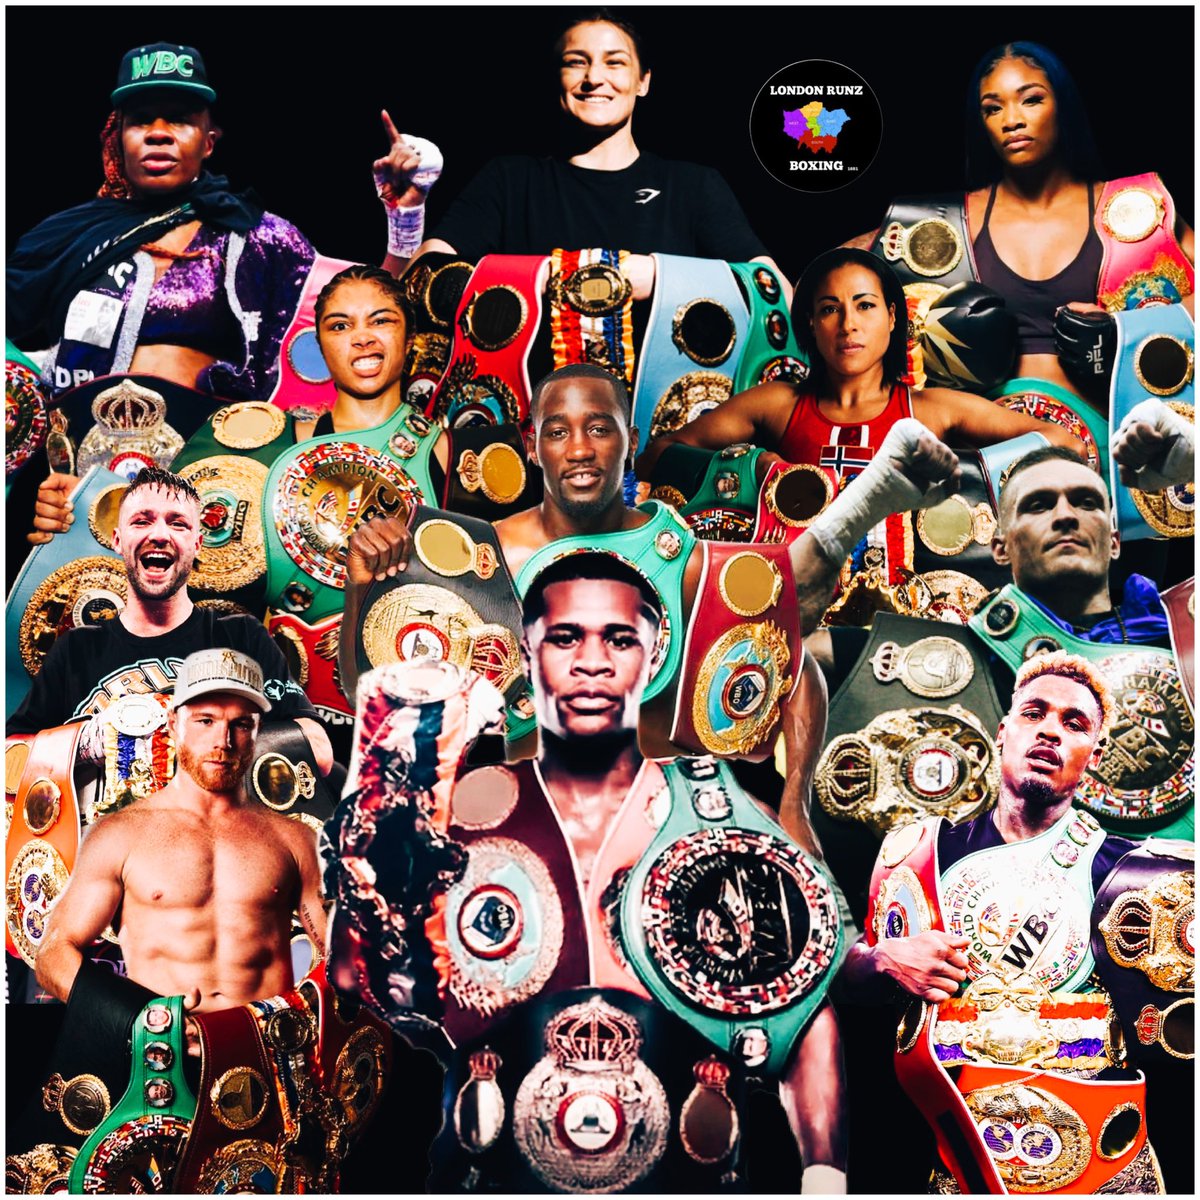 ITS HANEY TIME‼️🥊

@Realdevinhaney adds his name to this Eras illustrious list of Undisputed Champions. Fully deserved. Well done Champ‼️🥊 #Boxing #Haney #KambososHaney